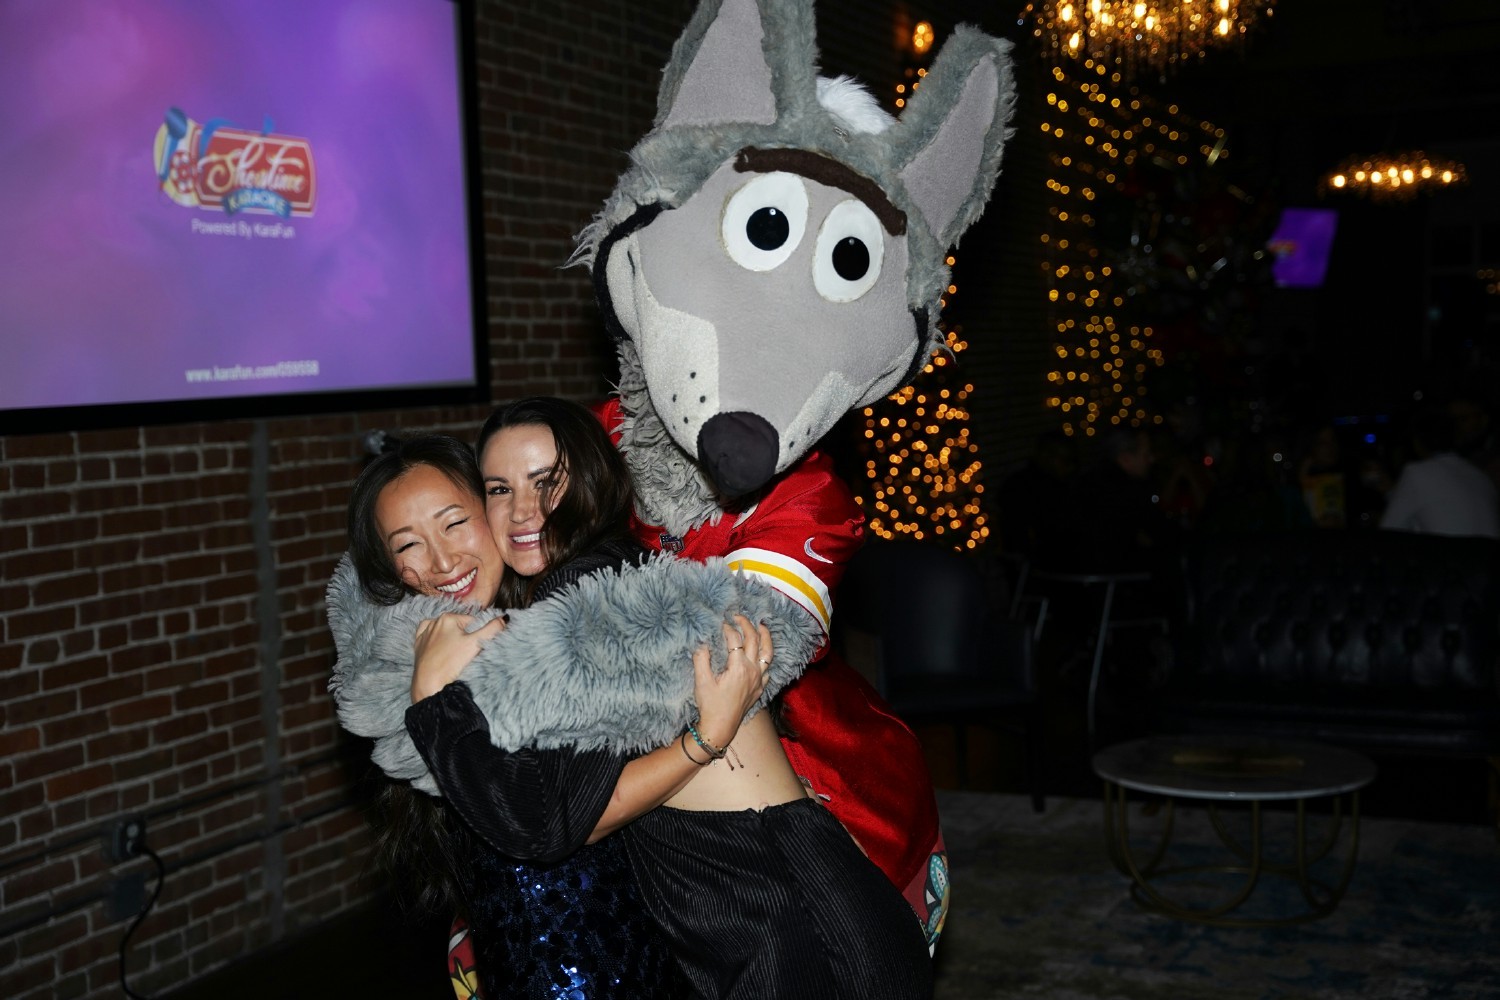 The best hugs come from KC Wolf, the KC Chiefs mascot